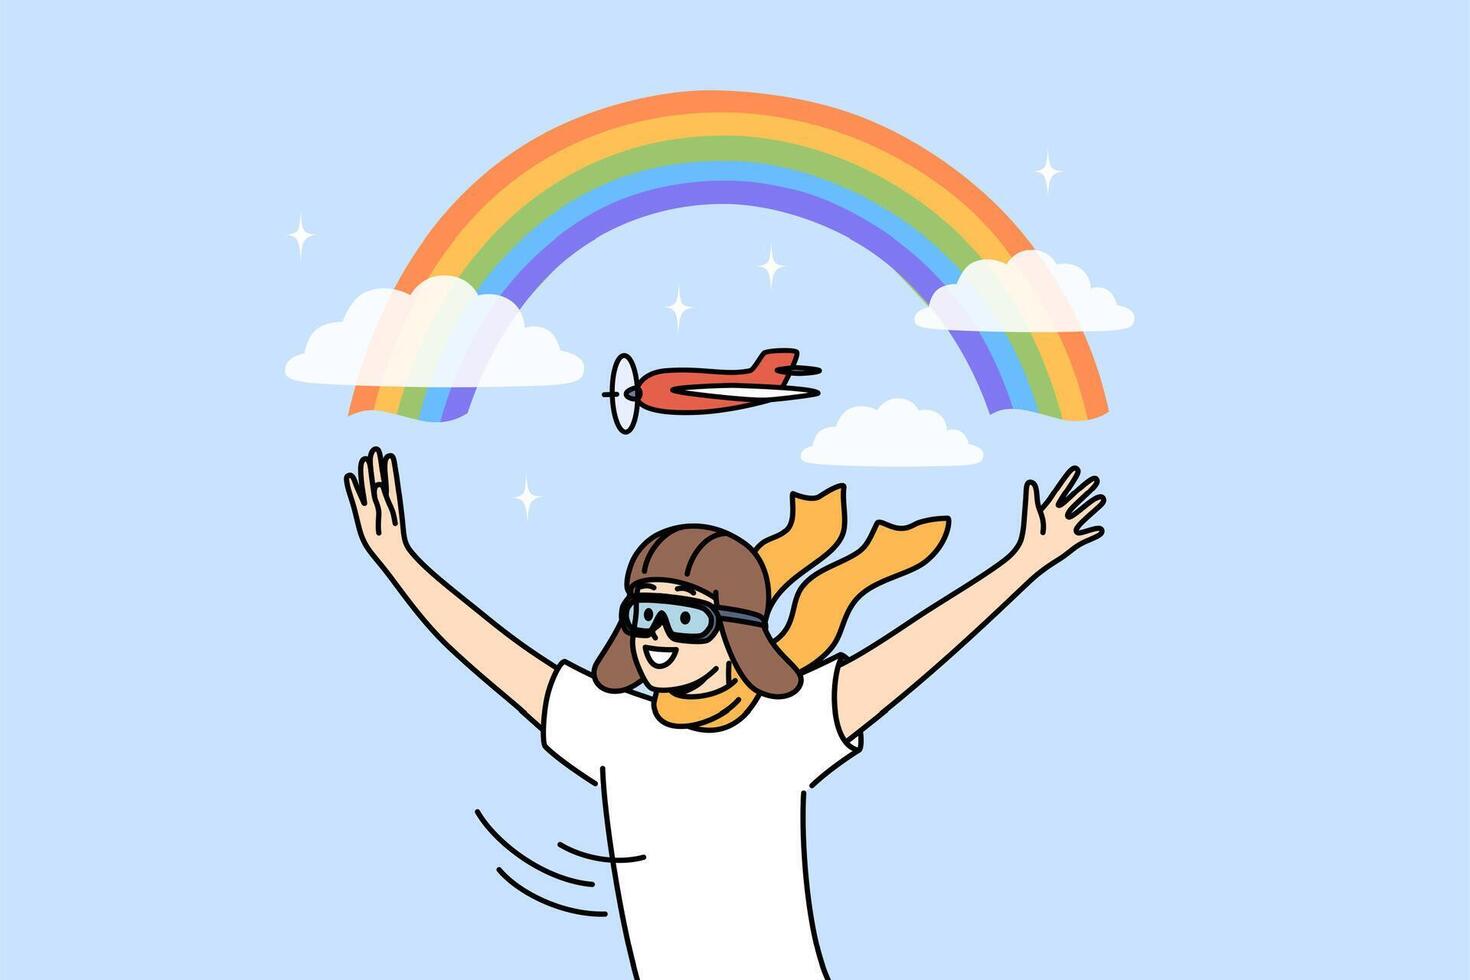 Boy in aviator hat dreams of becoming pilot and working as aviator, standing near rainbow in sky vector